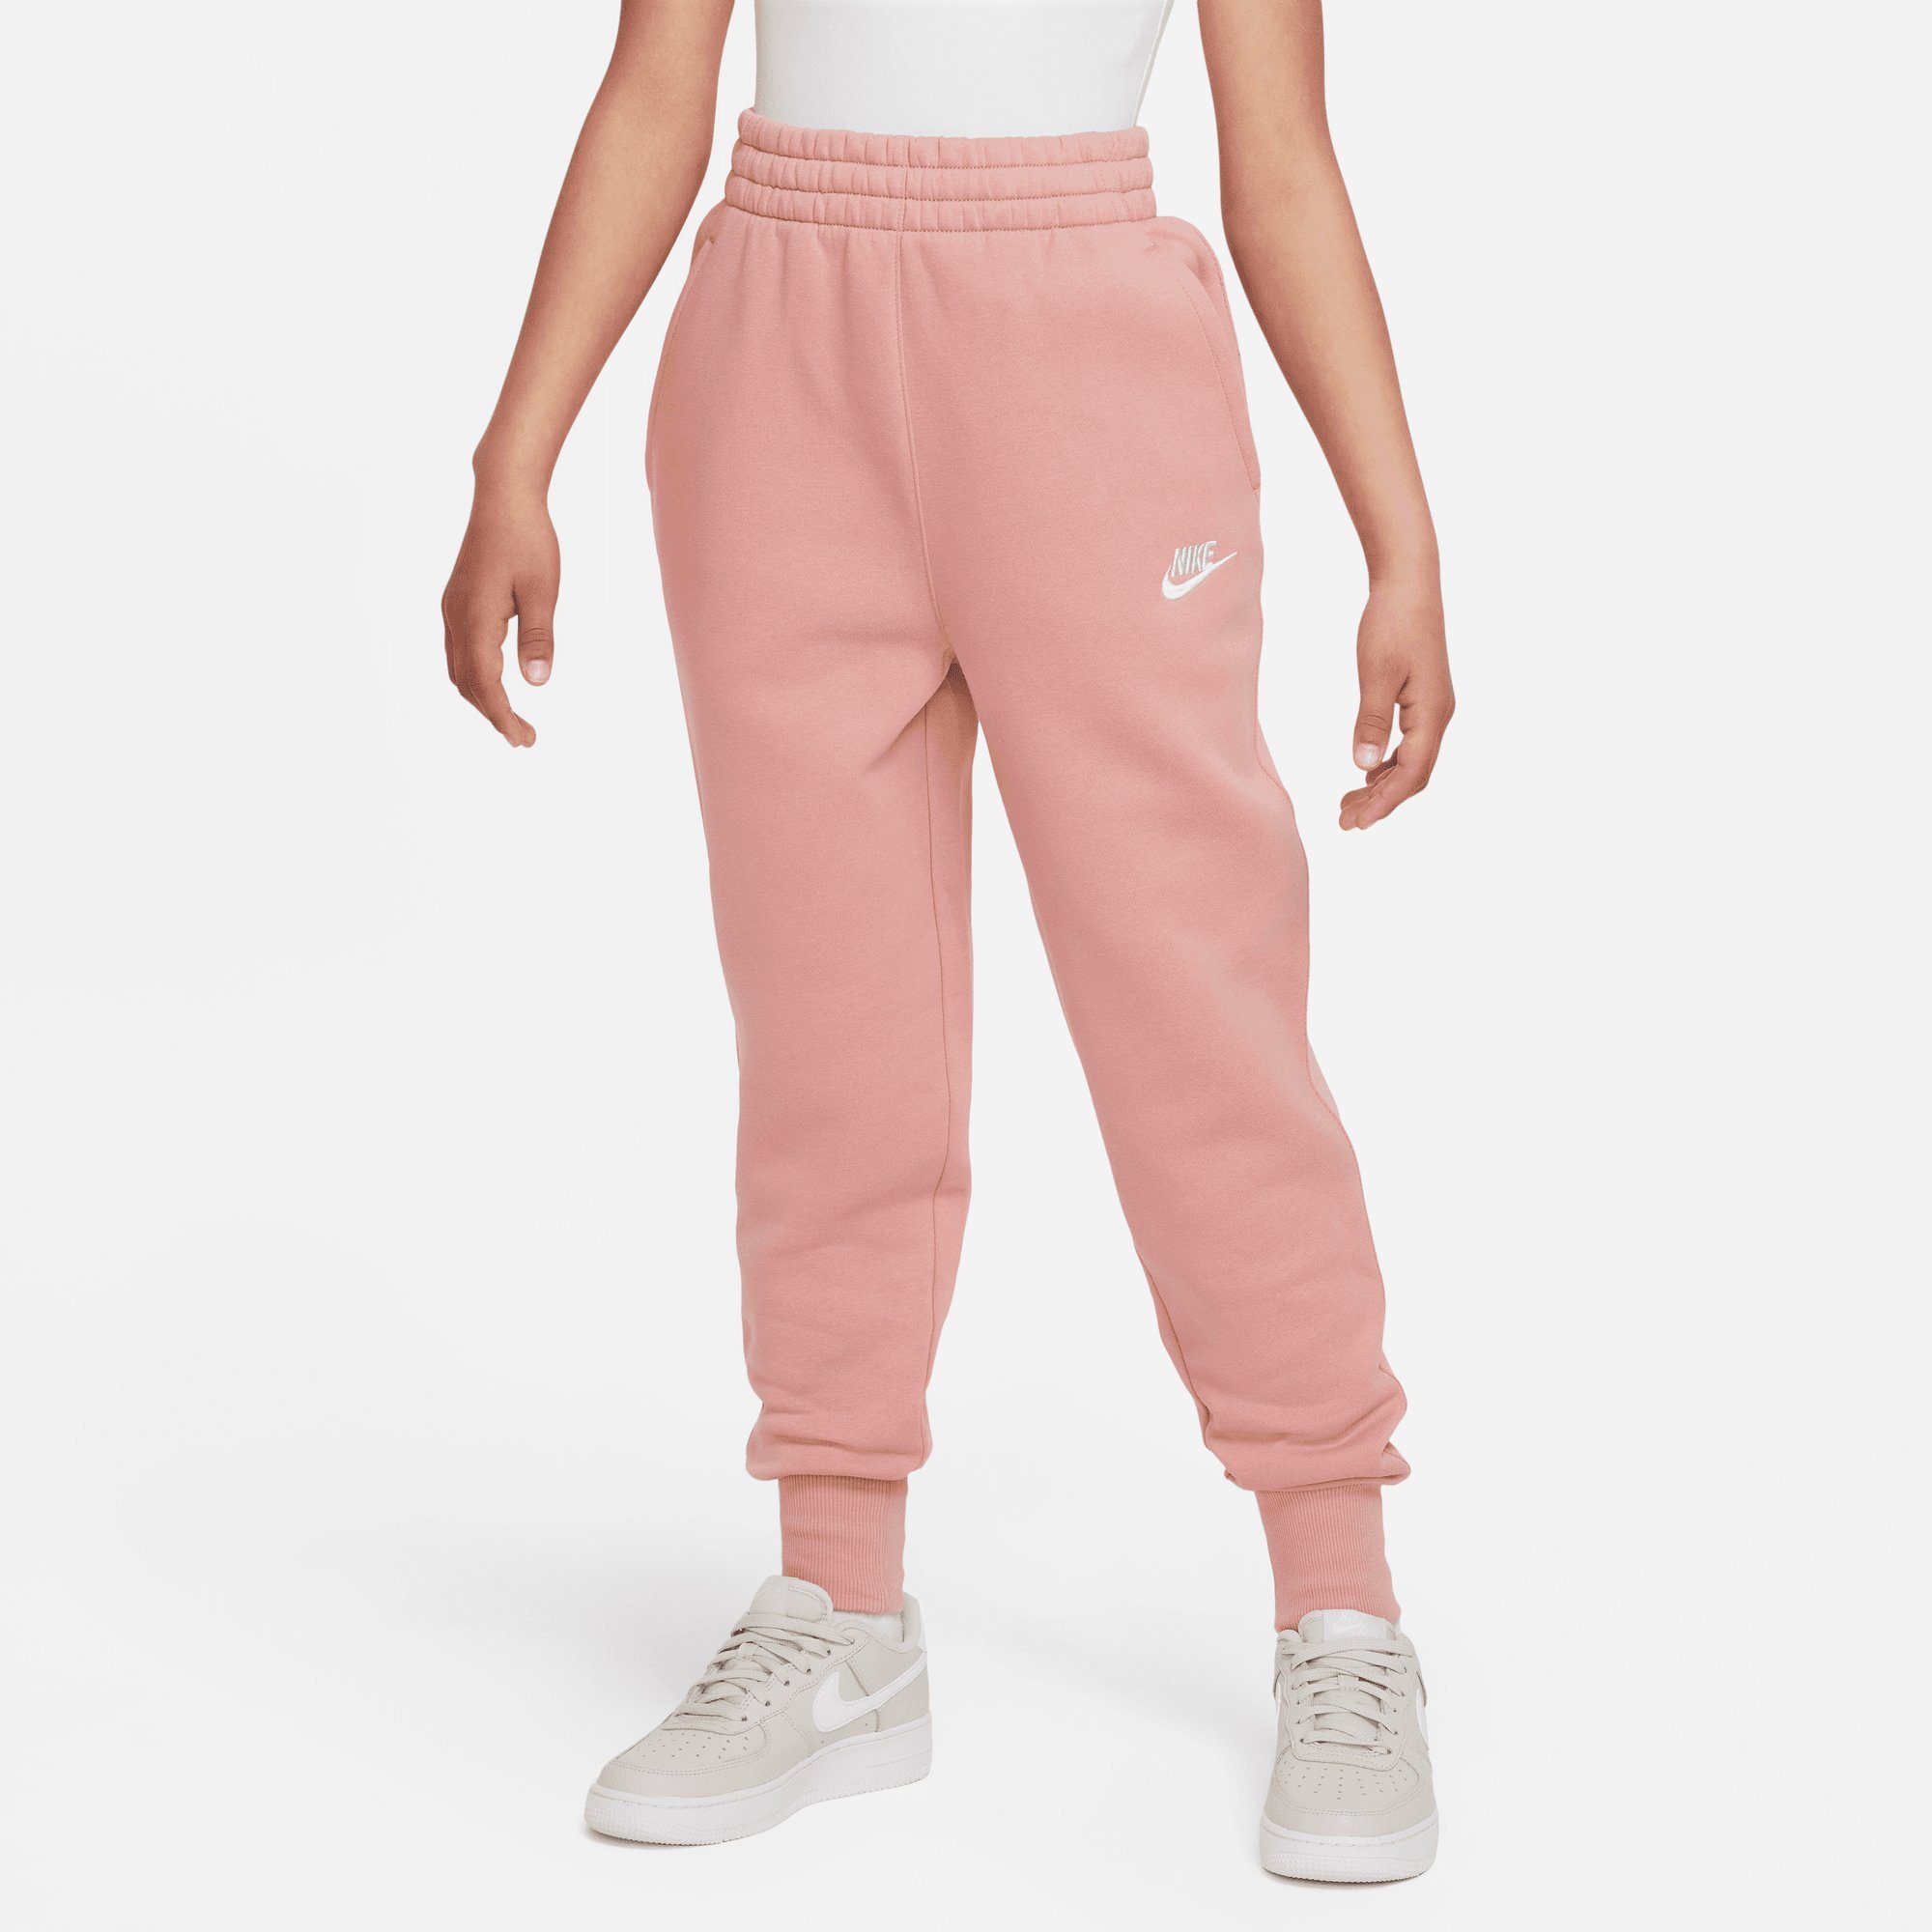 KIDS' PANTS STARDUST/WHITE Sportswear FLEECE Nike RED (GIRLS) CLUB STARDUST/RED BIG FITTED HIGH-WAISTED Jogginghose